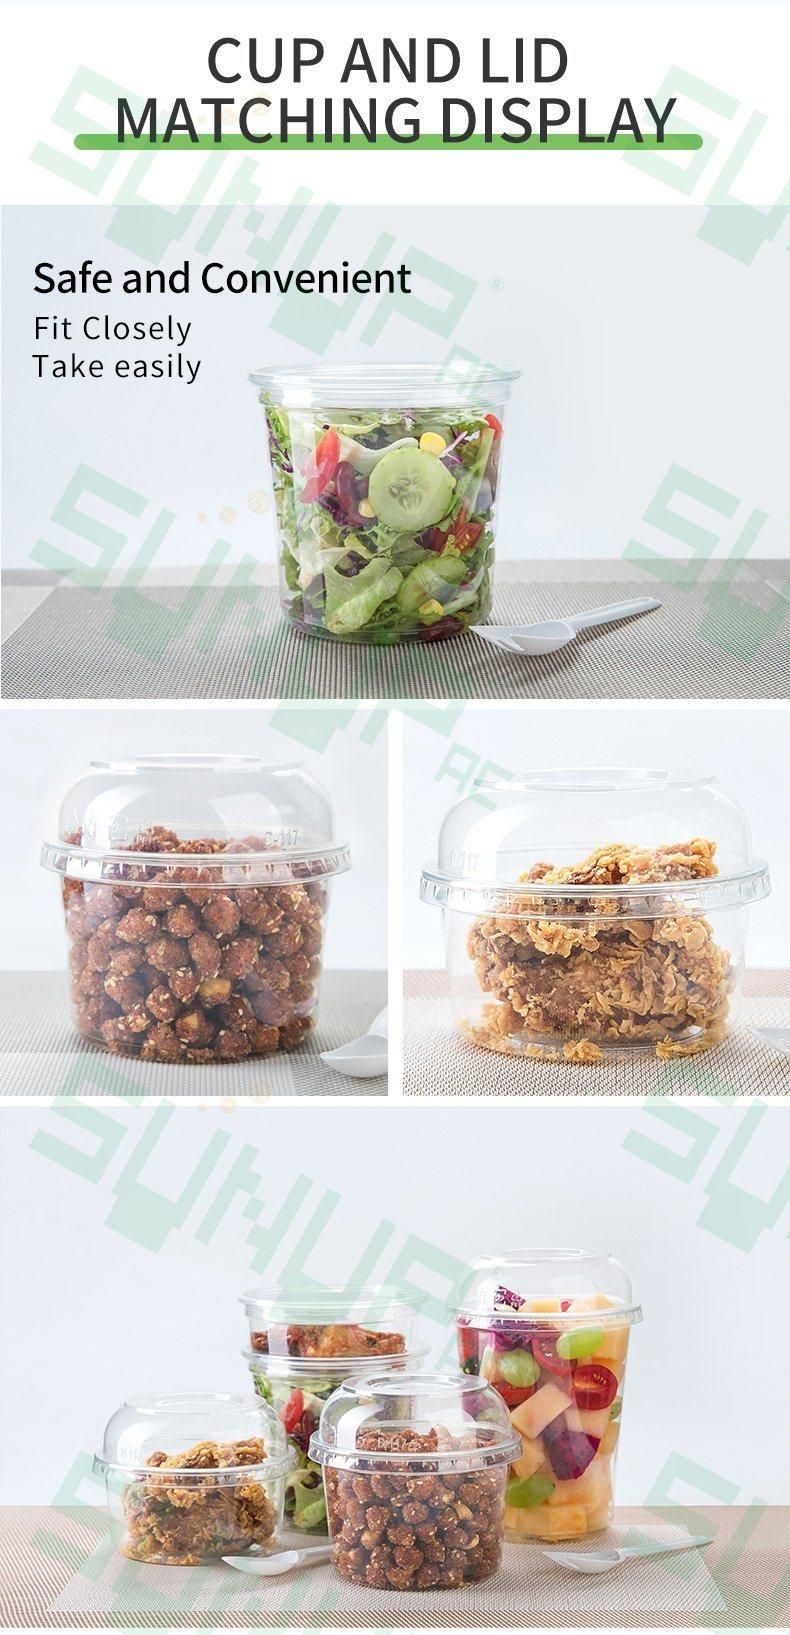 Disposable Custom Salad 16oz Pet Deli Container with Lid